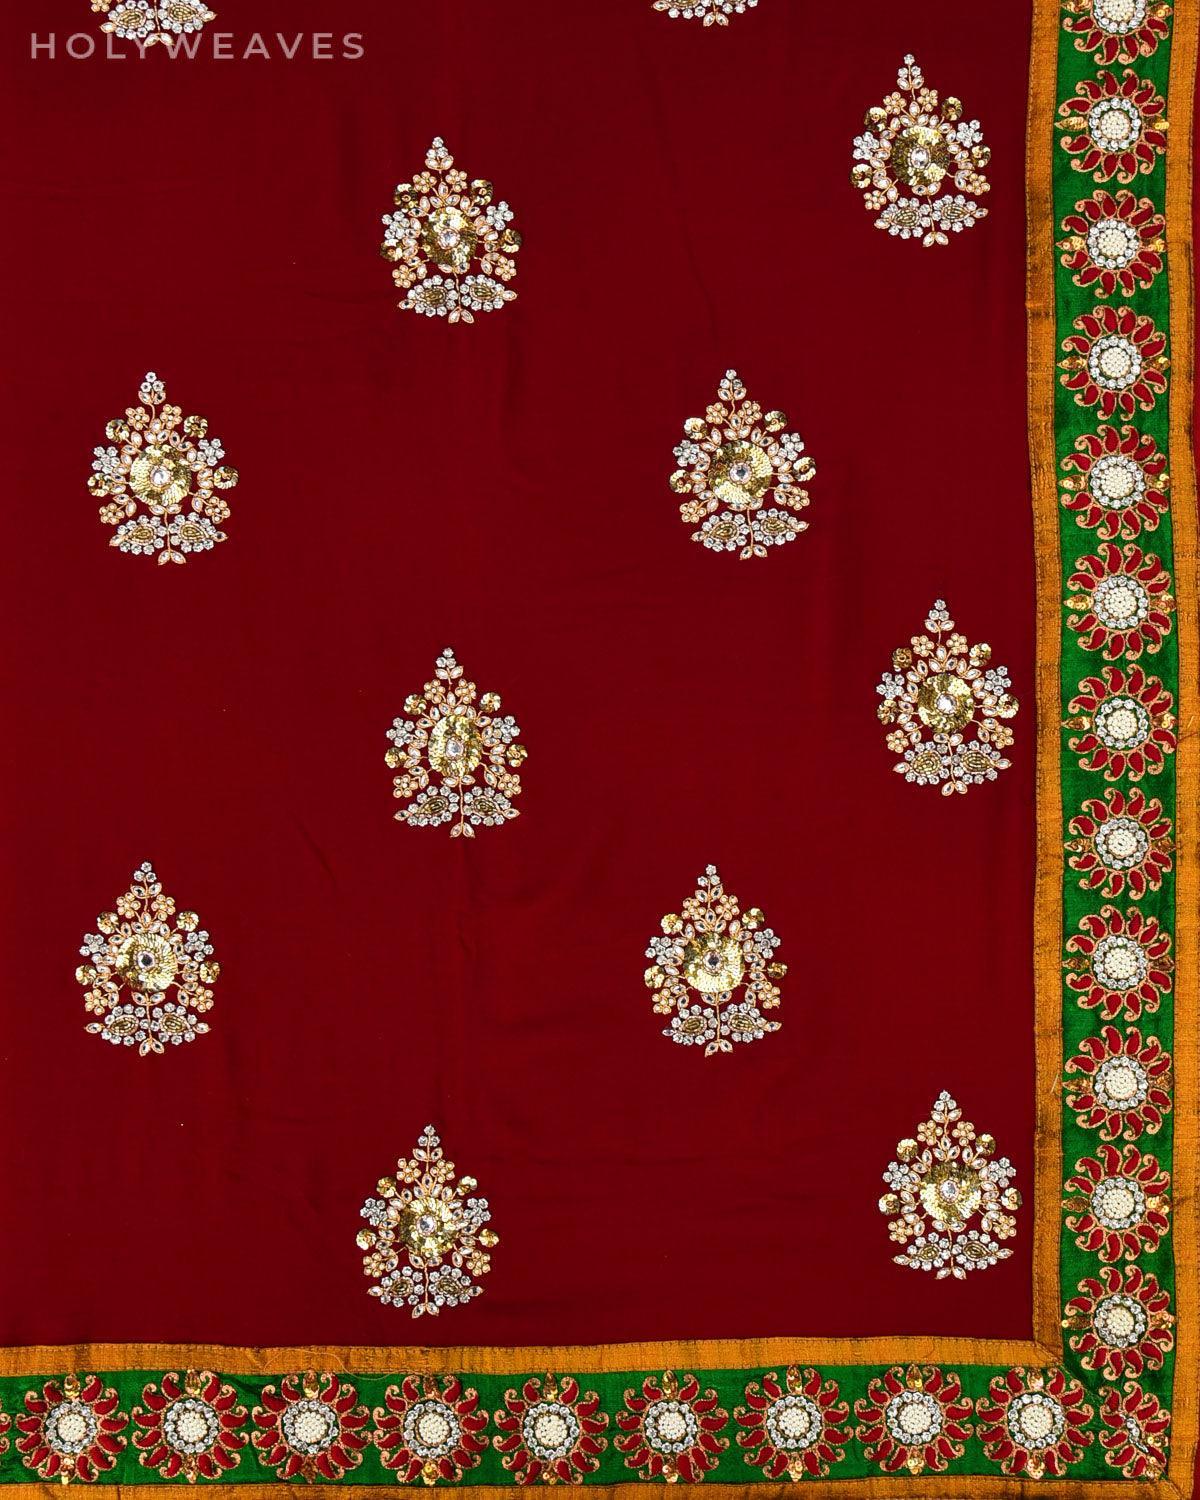 Maroon Hand-embroidered Georgette Saree - By HolyWeaves, Benares